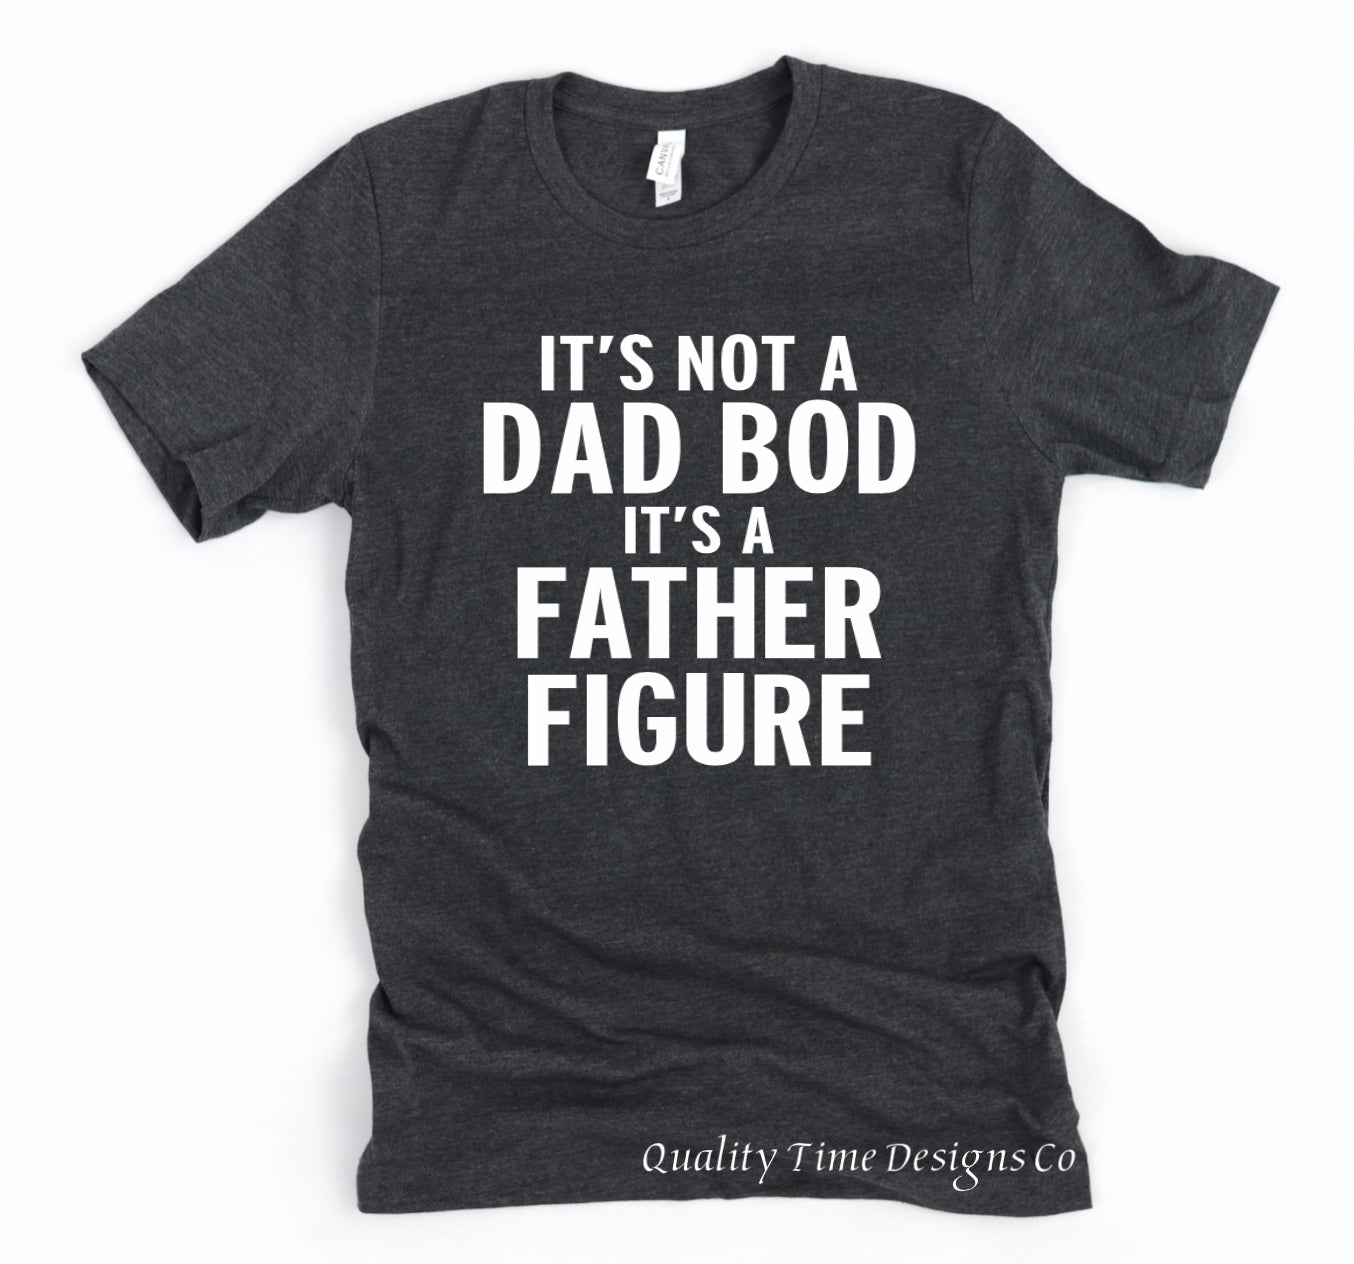 It’s not a dad bod it’s a father figure t-shirt 